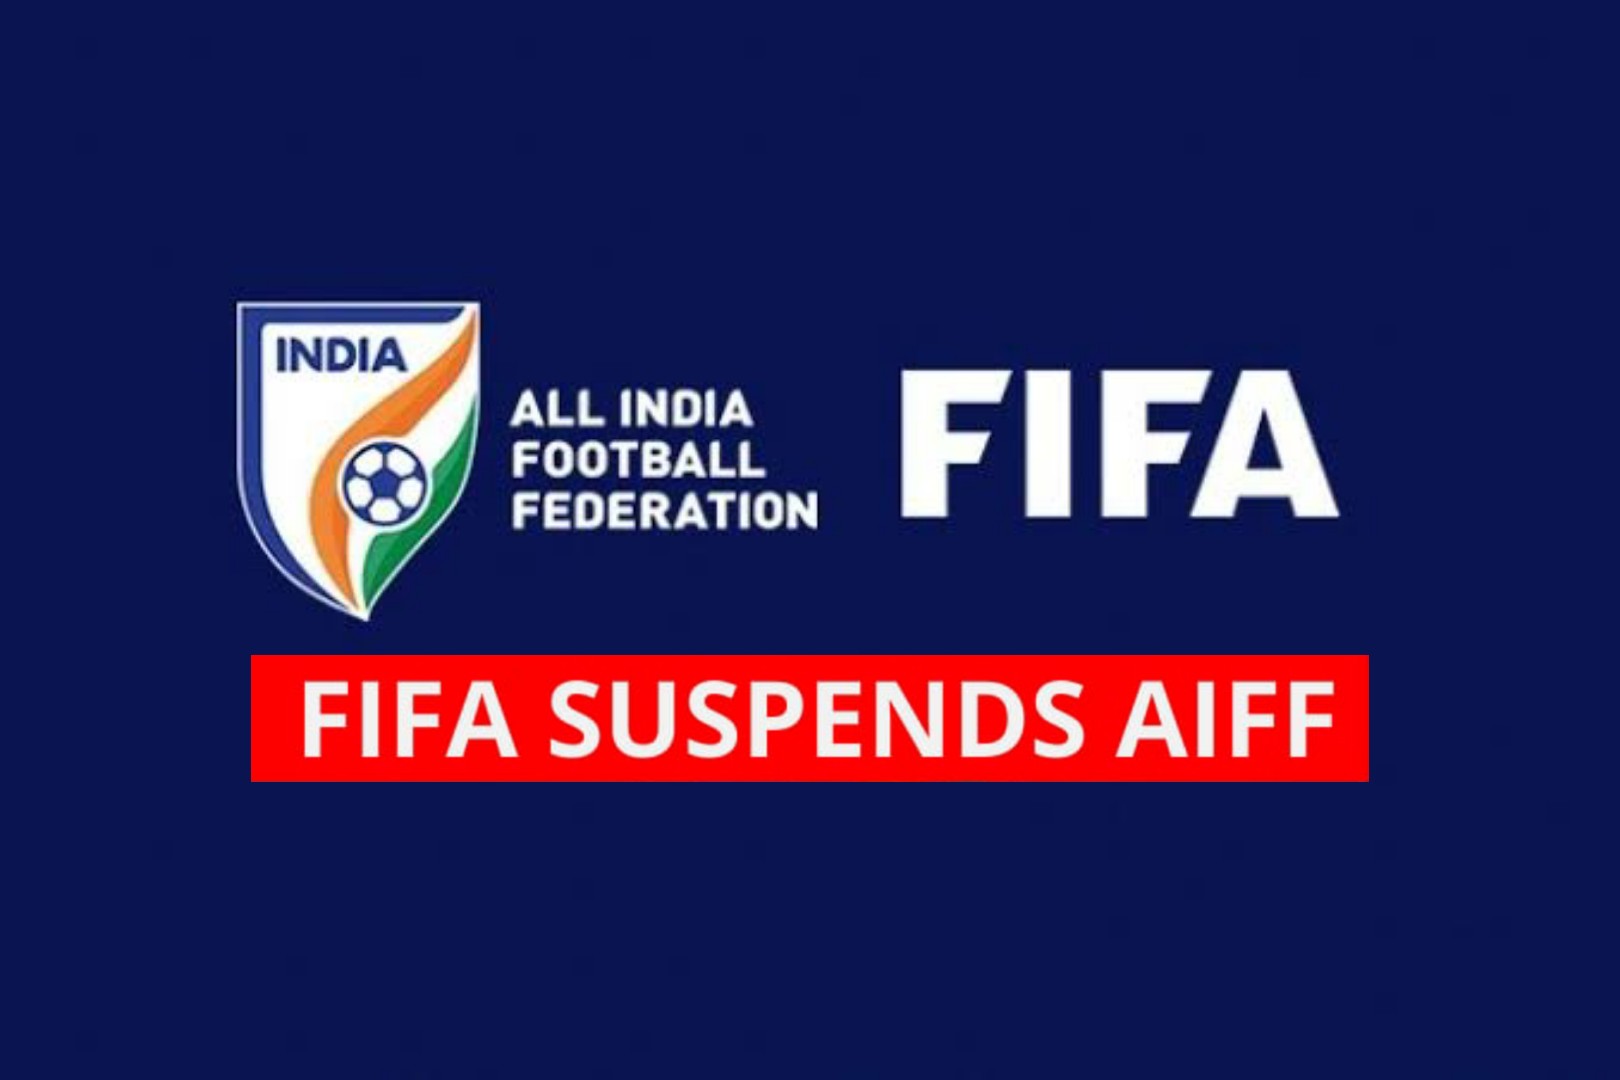 The AIFF Ban by FIFA and its Impact on Indian Football